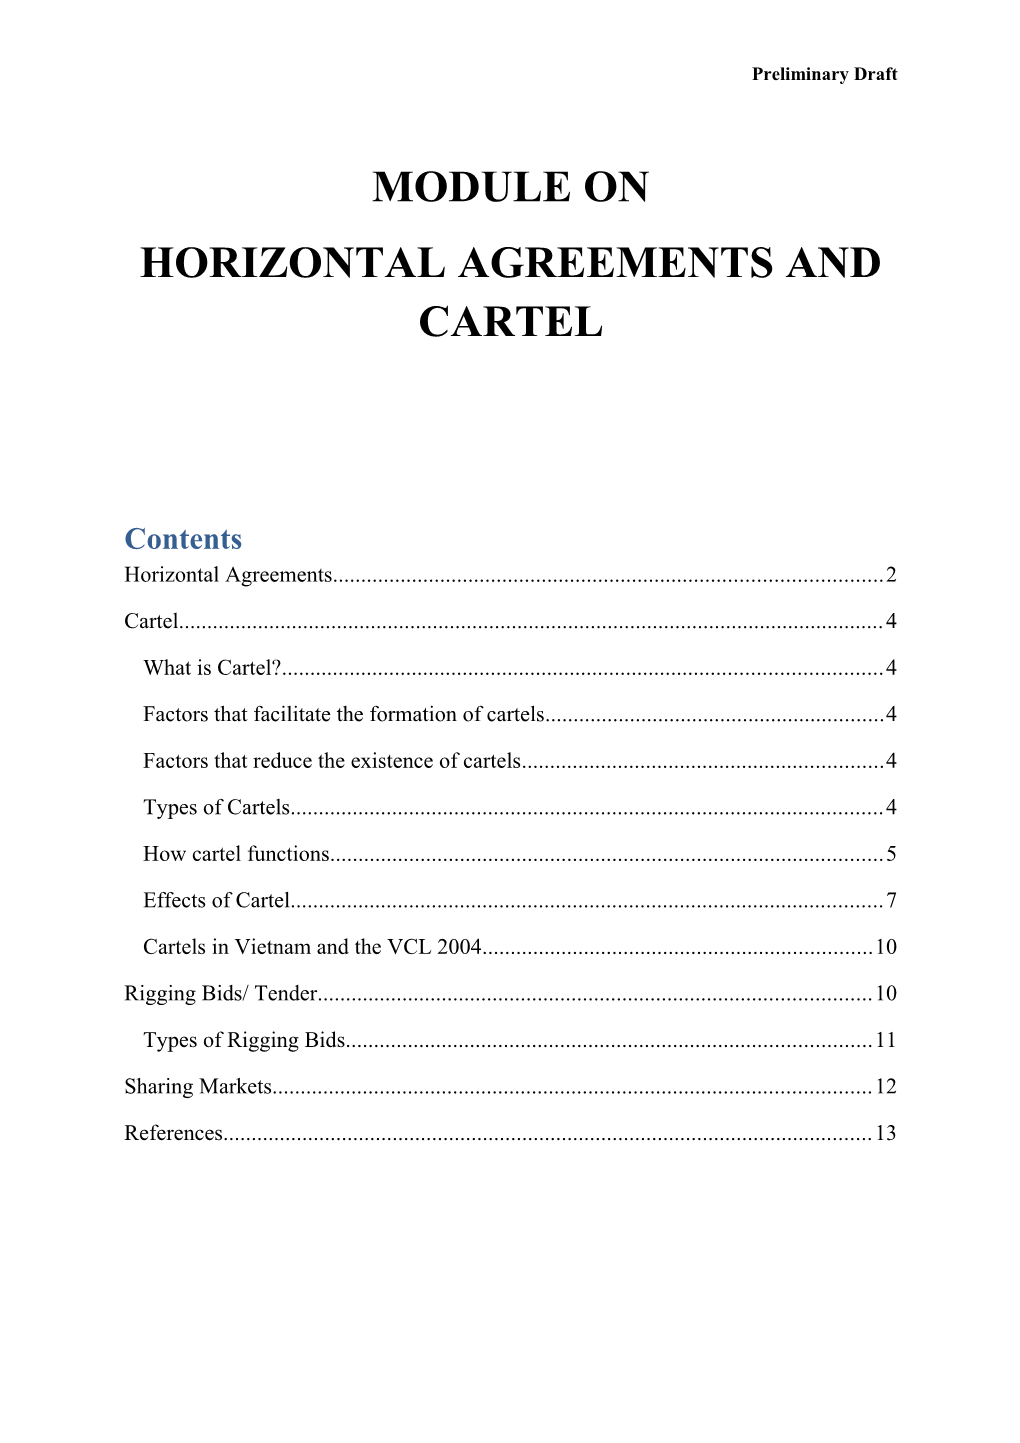 Horizontal Agreements and Cartel